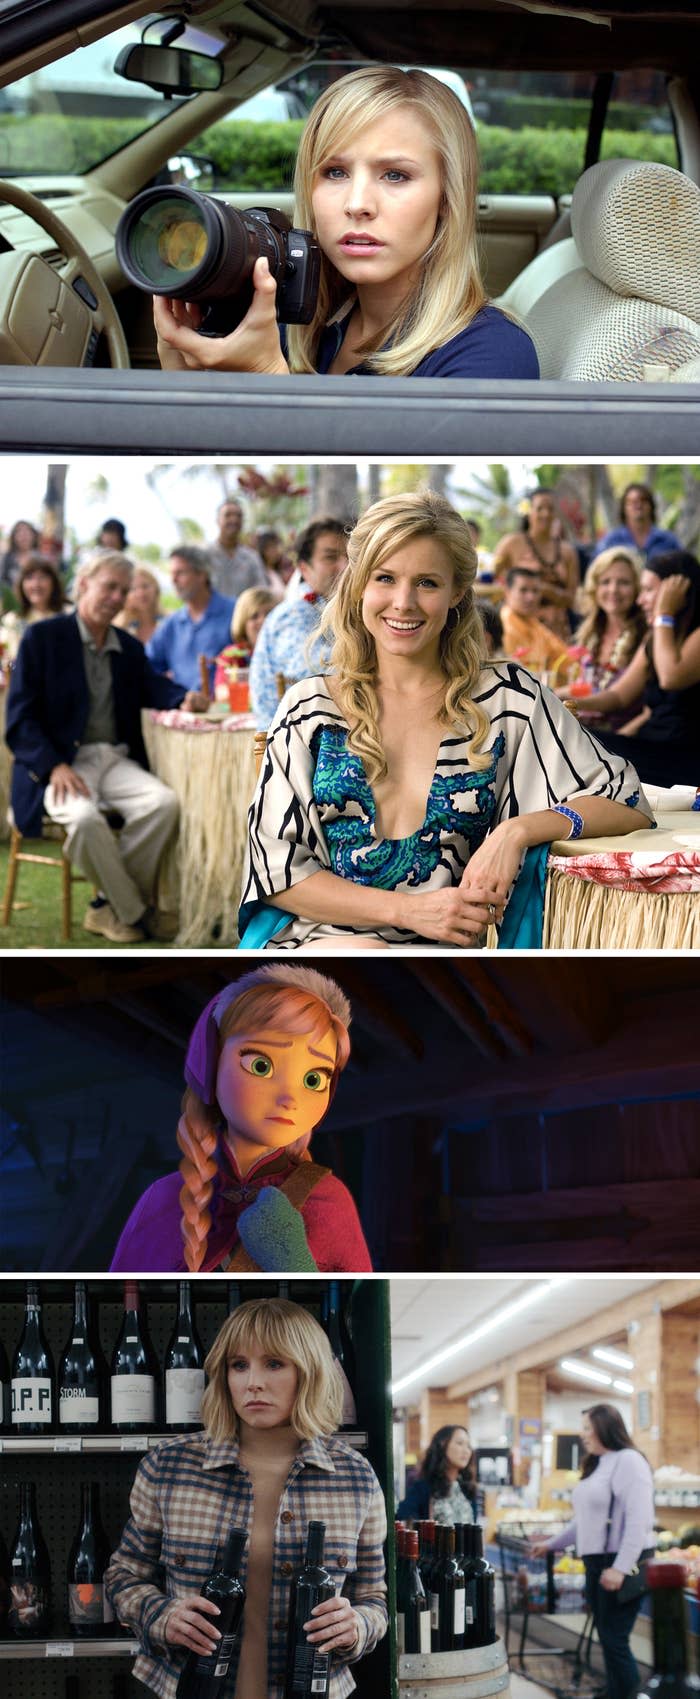 Kristen's various roles including Anna in the animated film Frozen and Veronica Mars